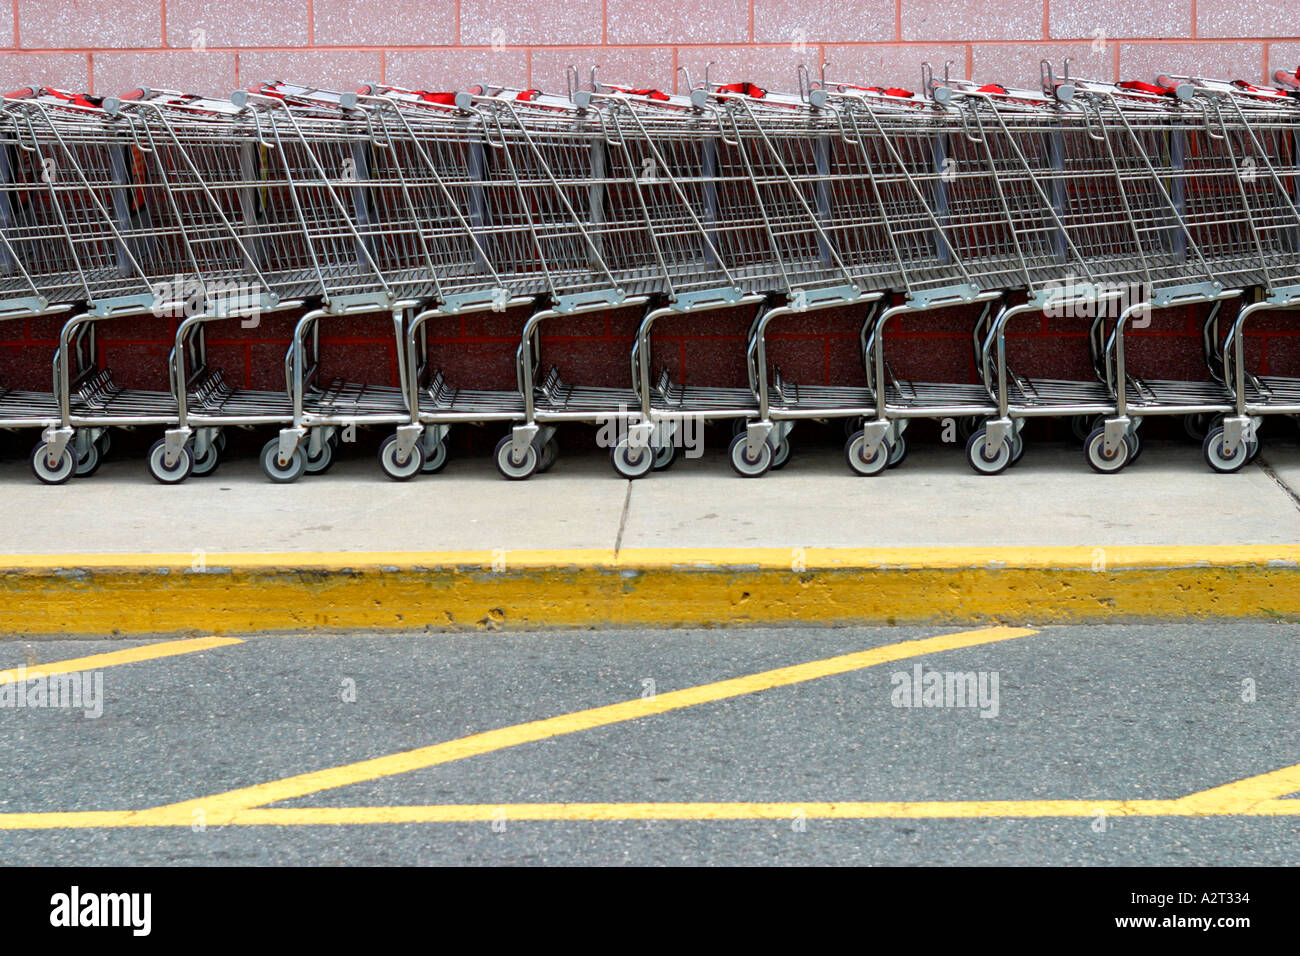 Shopping Carts At Grocery Store Stock Photo